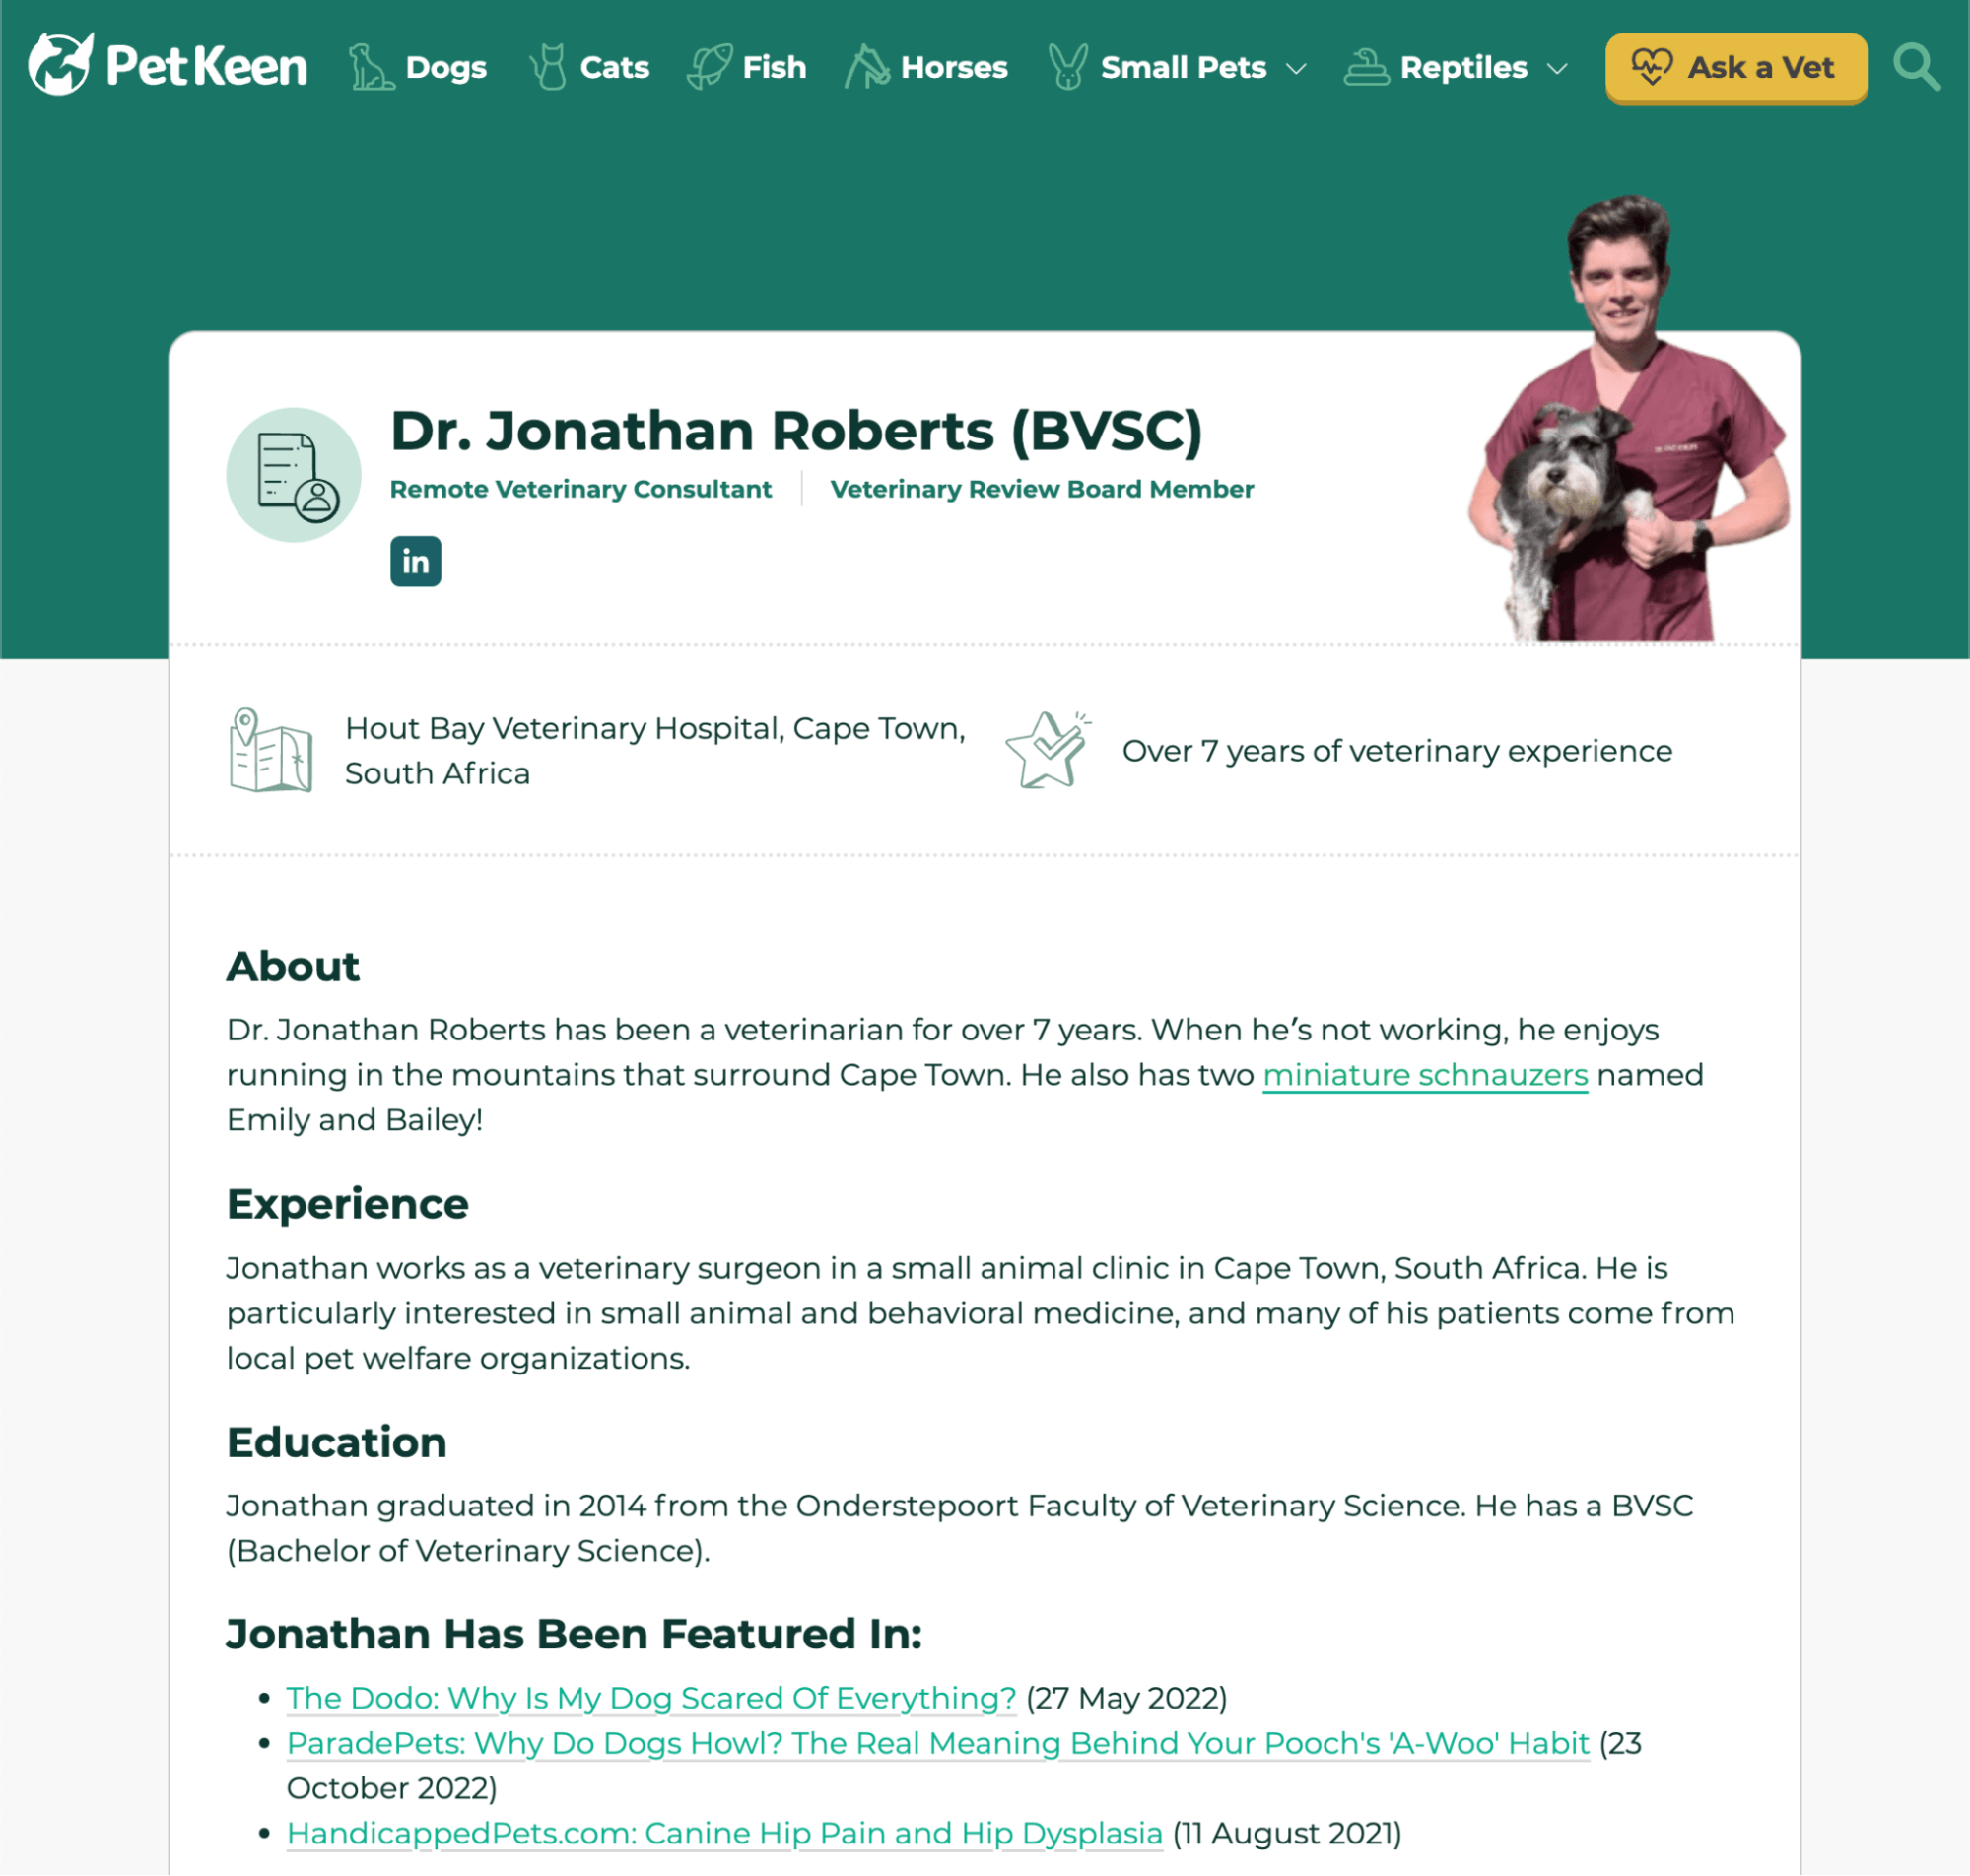 An author page on petkeen.com that shows the expertise of veterinarian Dr. Jonathan Roberts